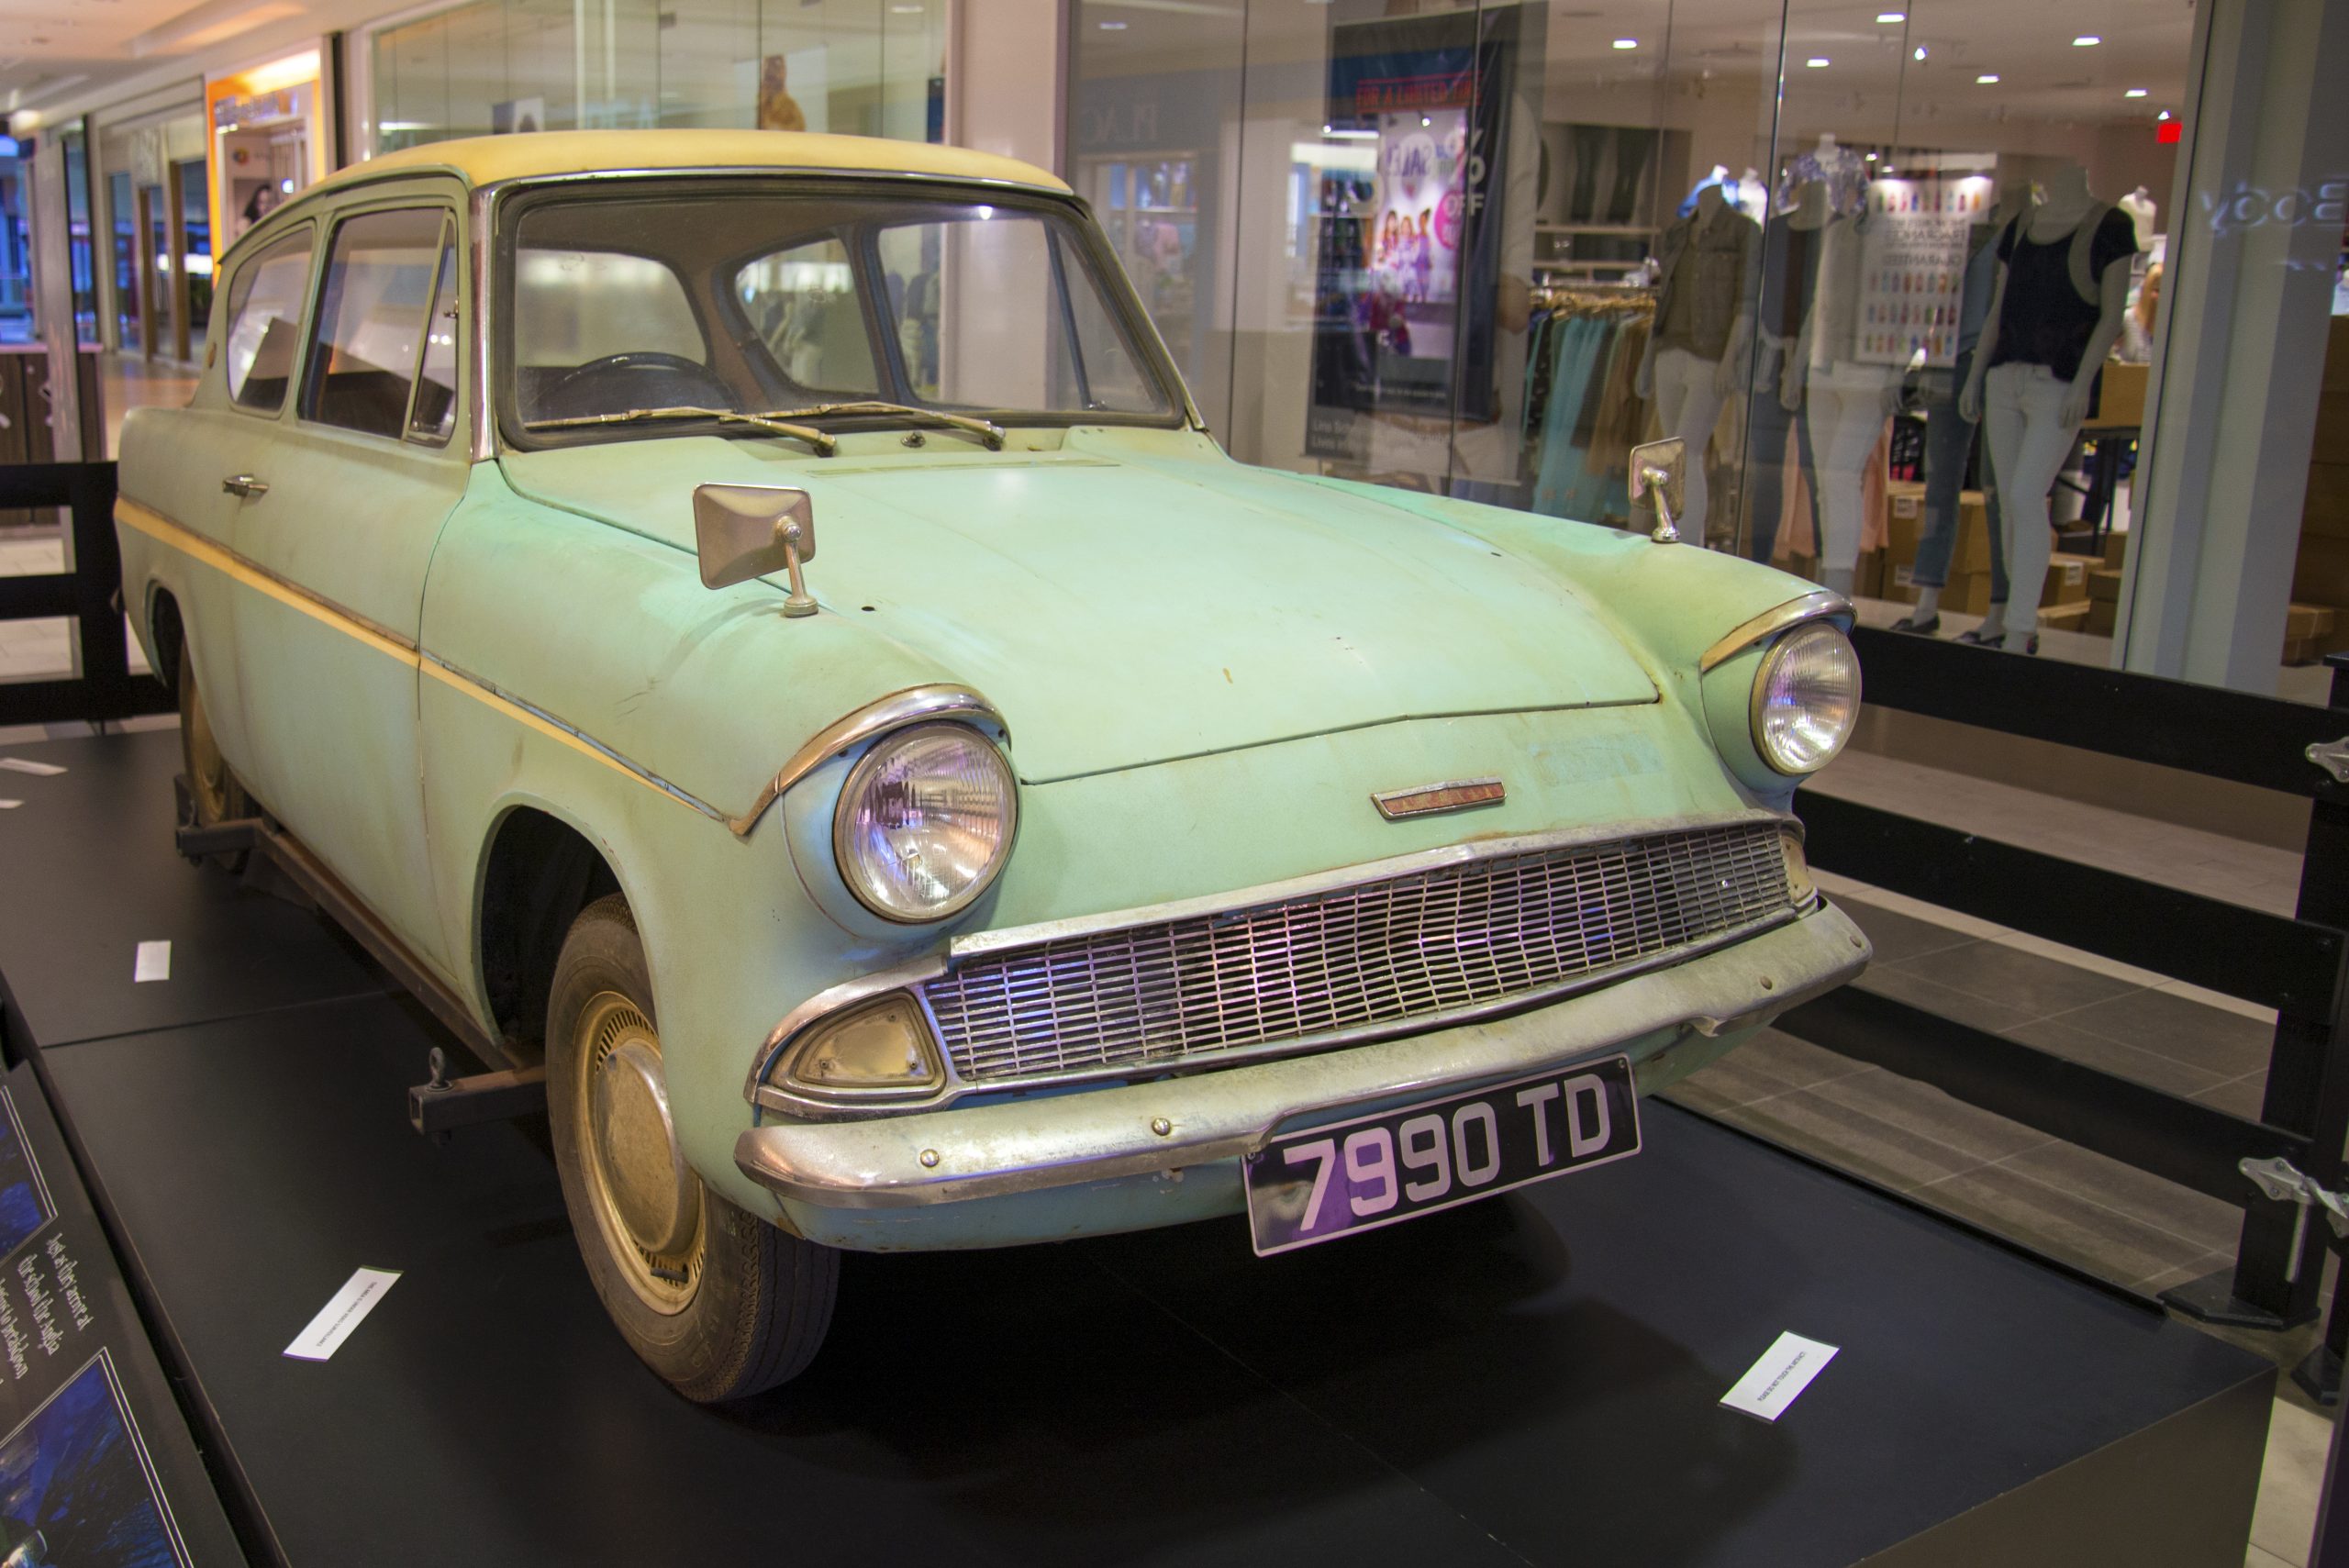 Edmonton,,Ab,,Canada-march,14,,2014:,The,Flying,Ford,Anglia,Used